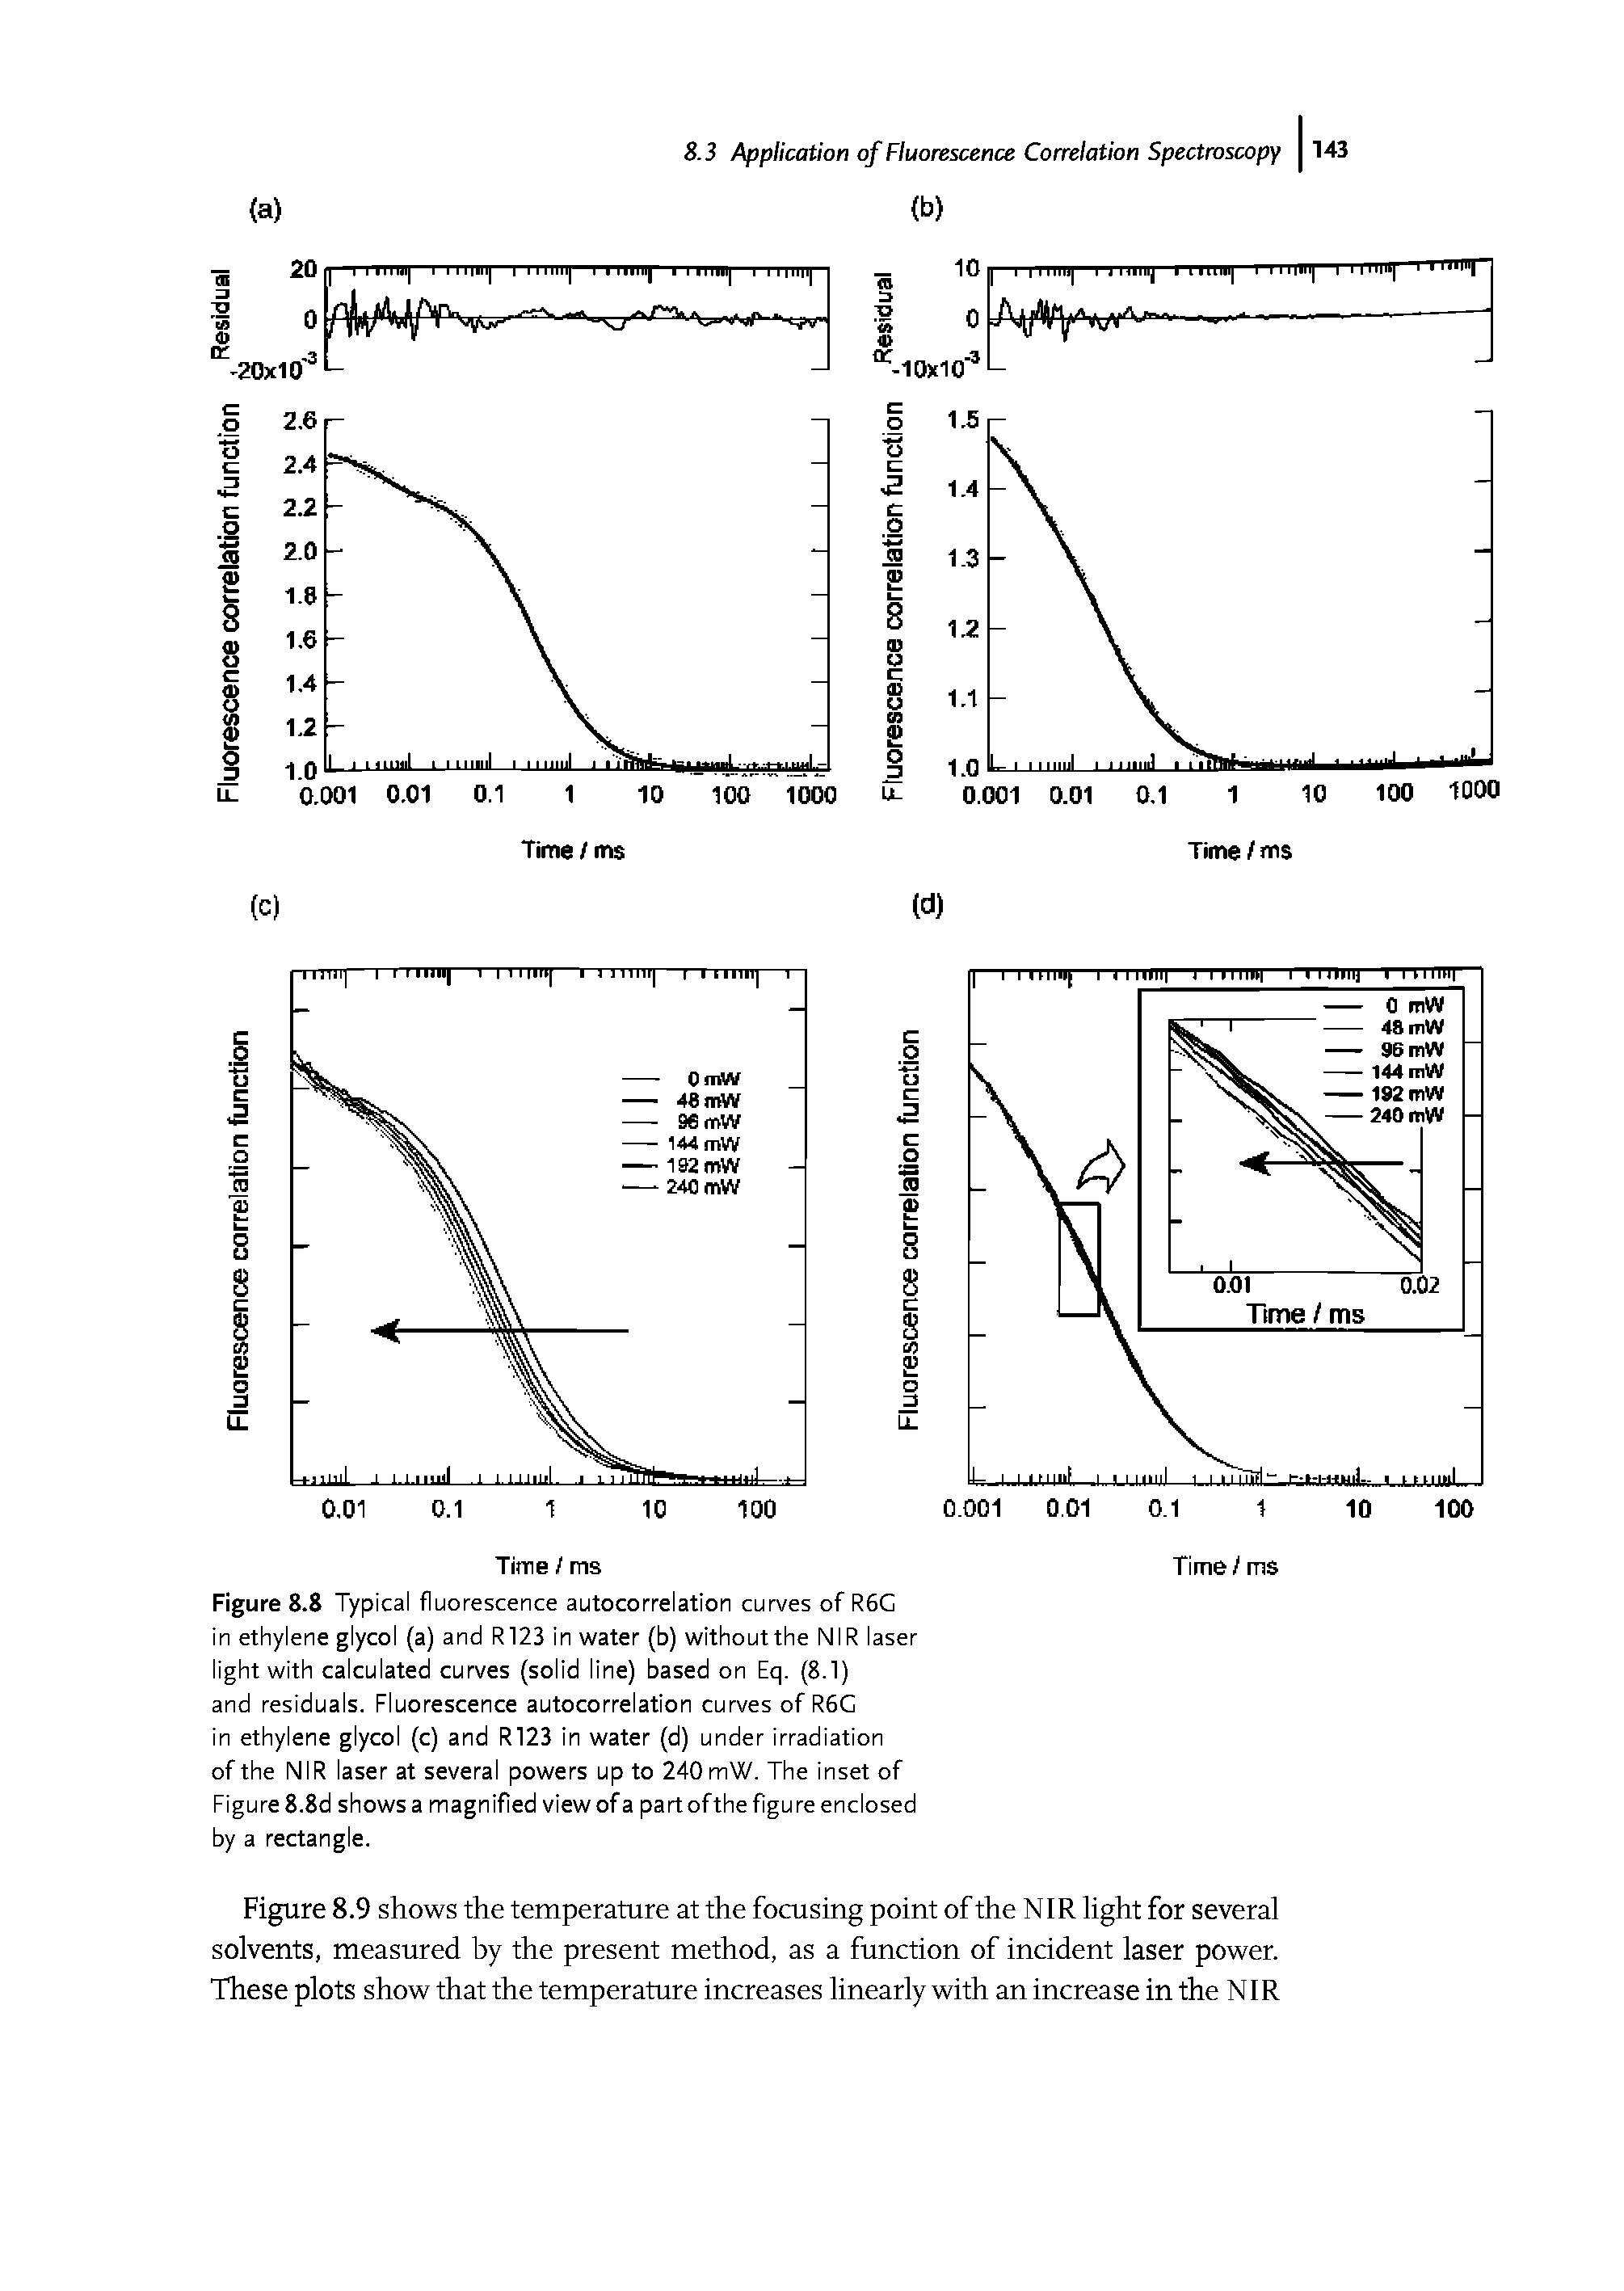 Figure 8.8 Typical fluorescence autocorrelation curves of R6G in ethylene glycol (a) and R123 in water (b) without the NIR laser light with calculated curves (solid line) based on Eq. (8.1) and residuals. Fluorescence autocorrelation curves of R6G in ethylene glycol (c) and R123 in water (d) under irradiation of the NIR laser at several powers up to 240 mW. The inset of Figure 8.8d shows a magnified view of a partofthe figure enclosed by a rectangle.